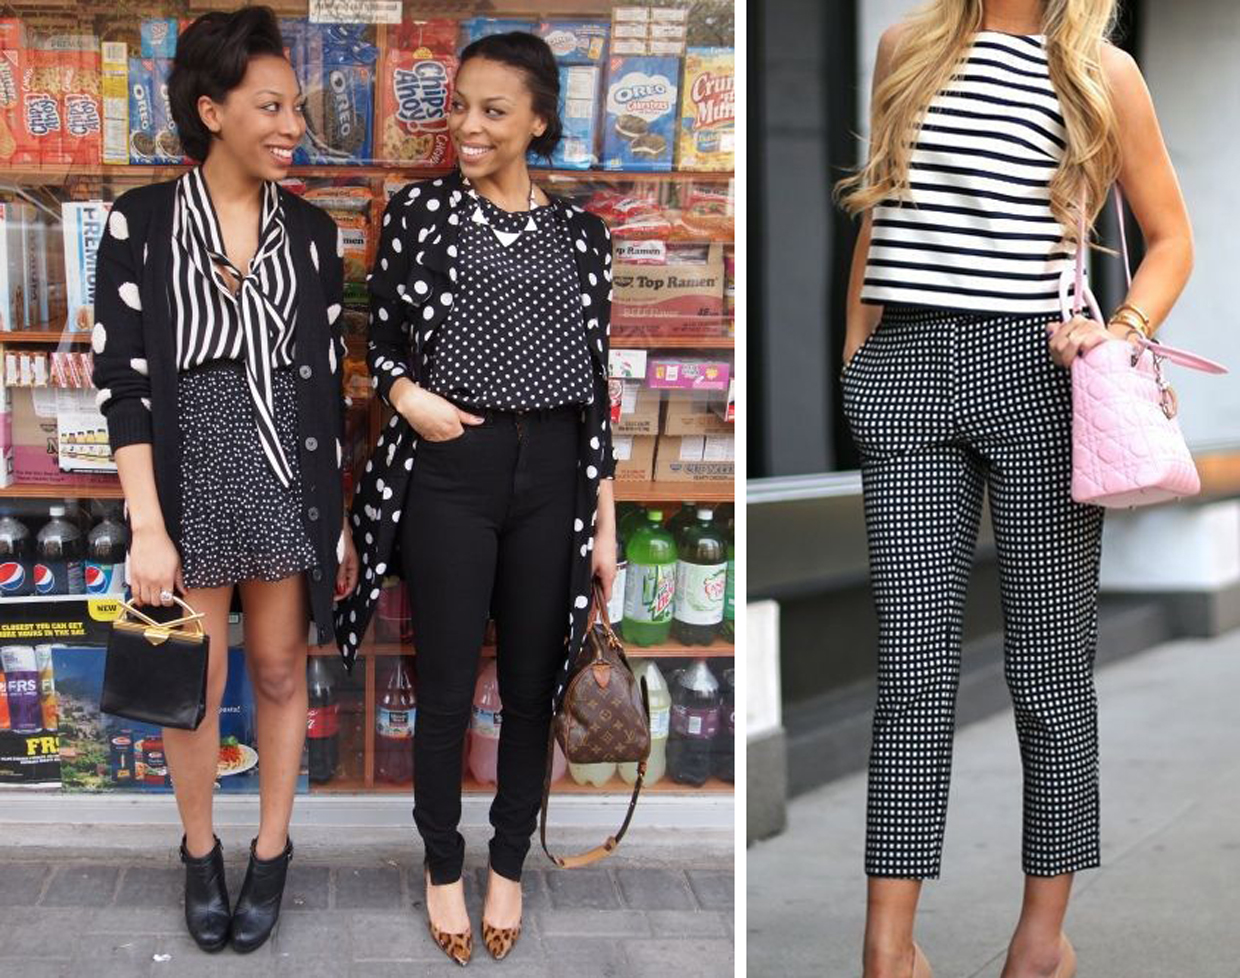 7 Tips on How to Mix Prints and Patterns Into Your Outfits